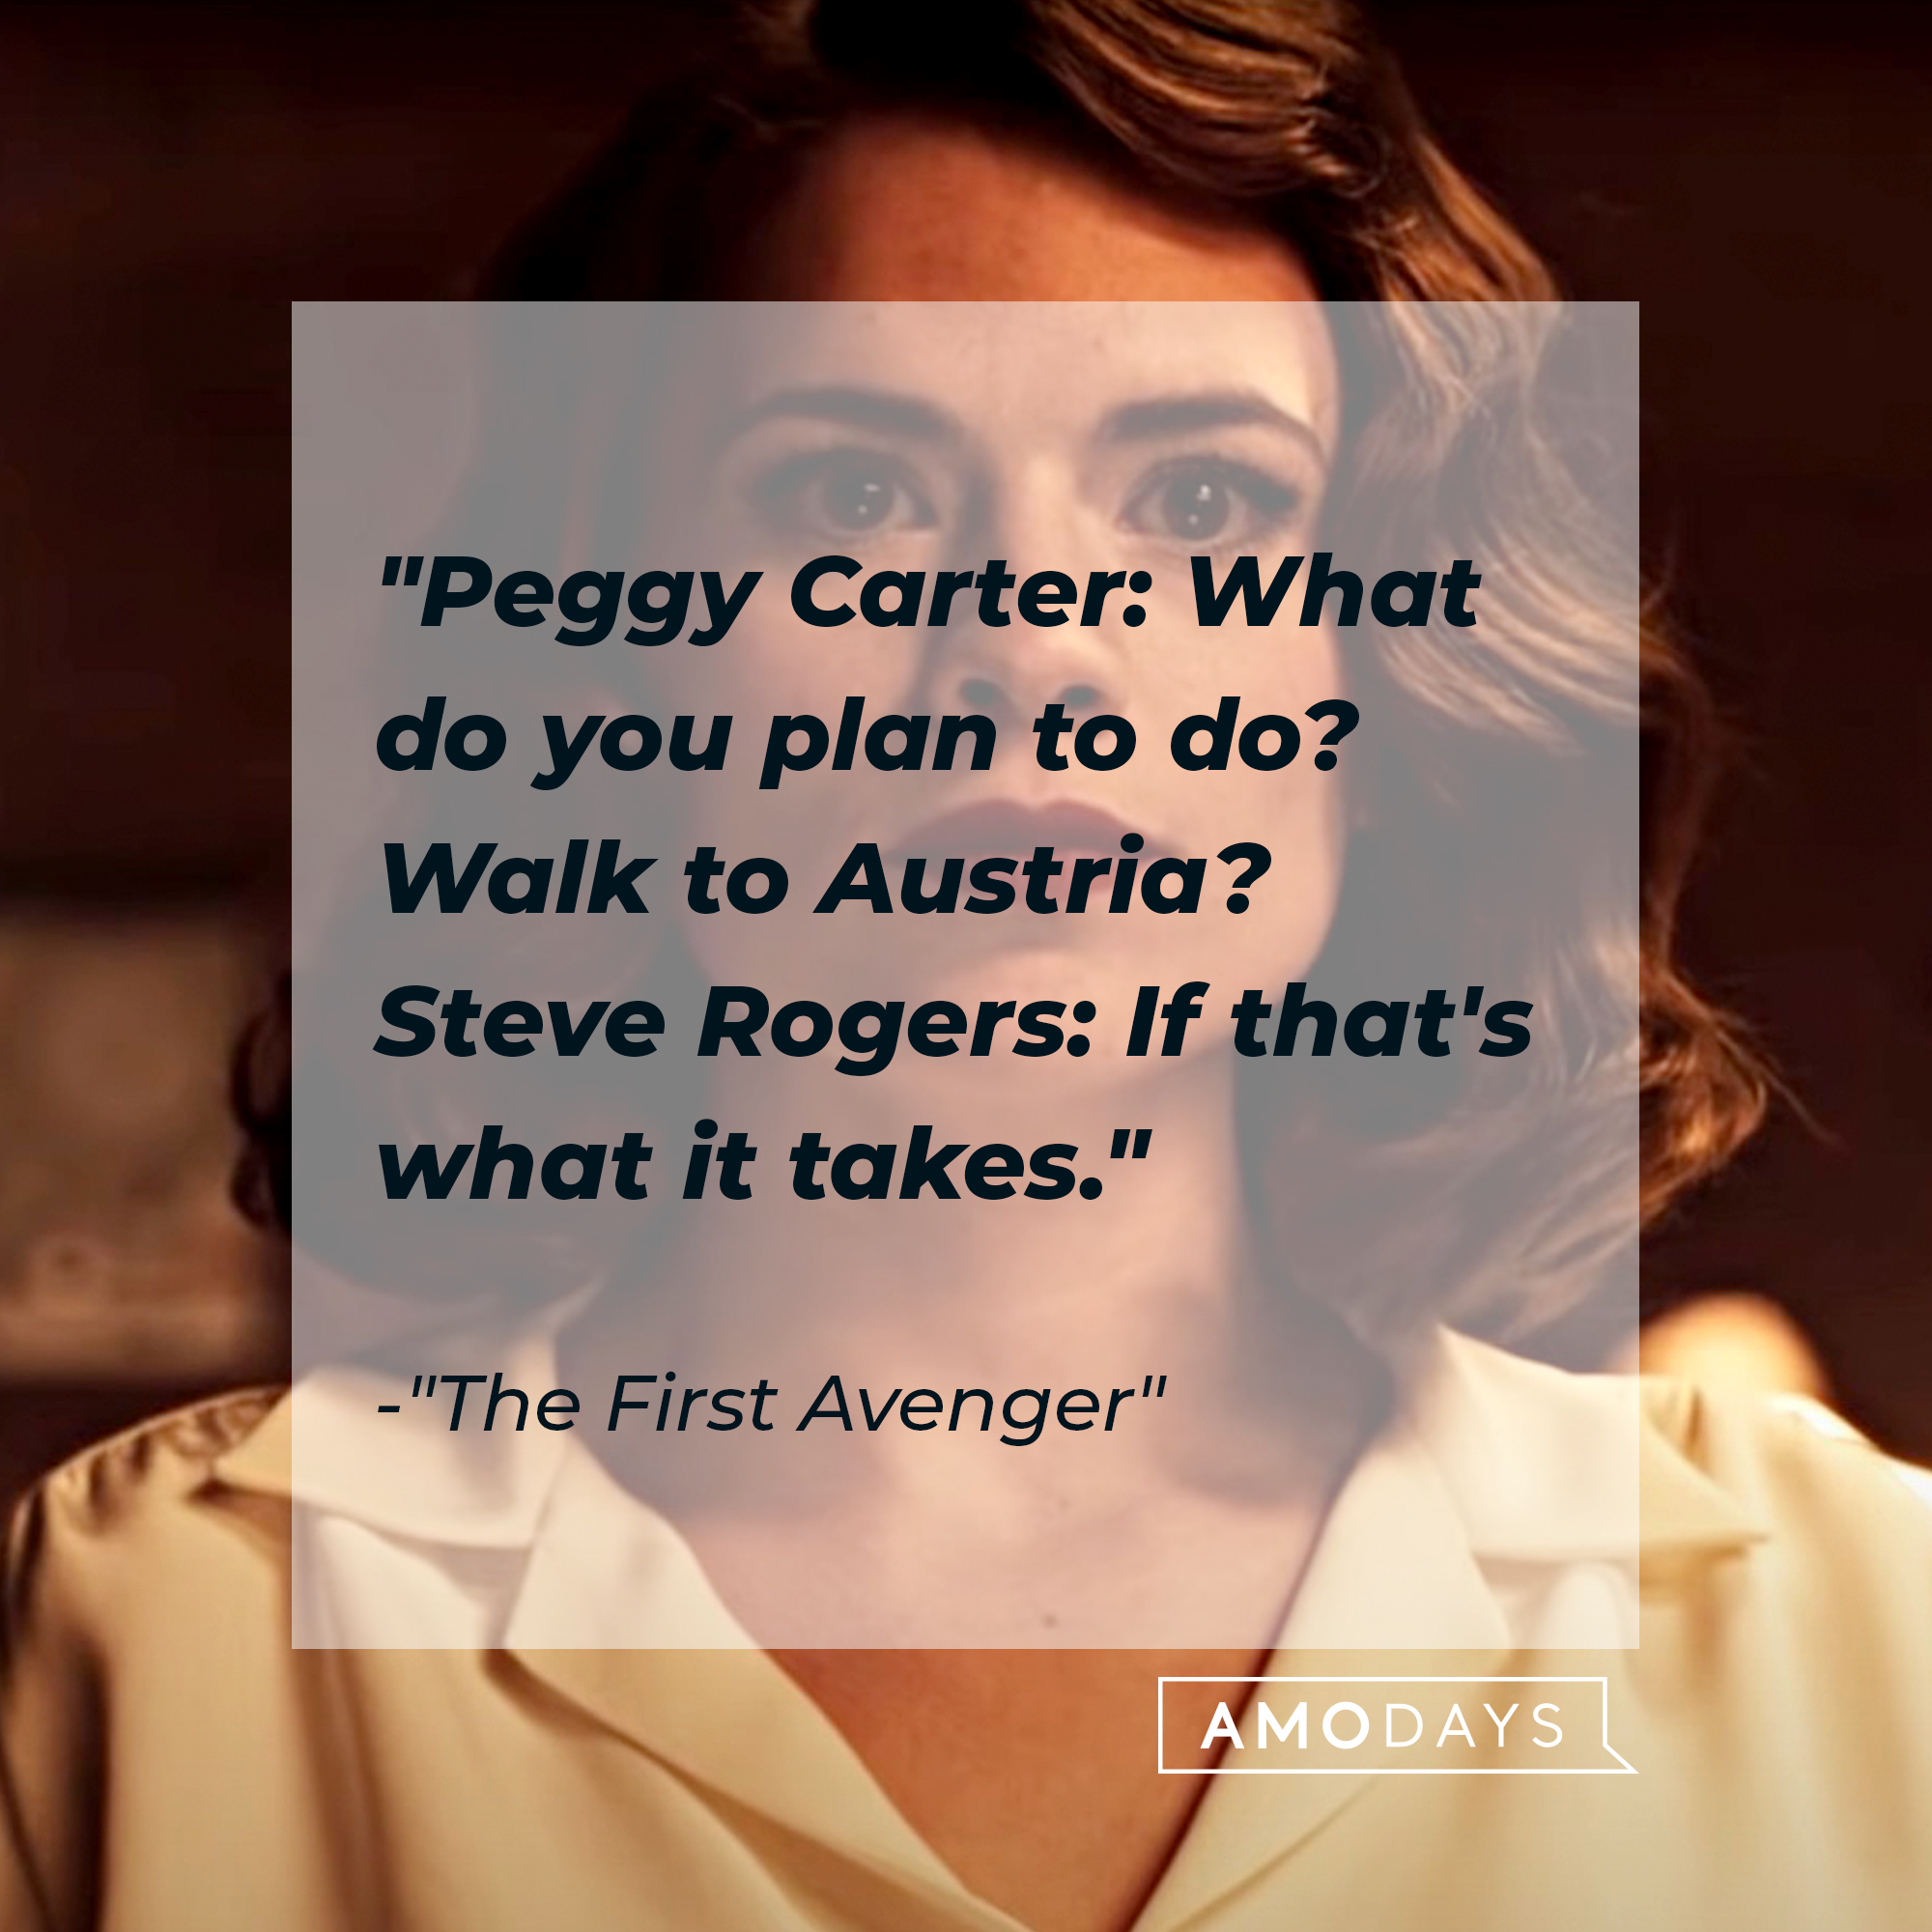 Quote from "The First Avenger": "Peggy Carter: What do you plan to do? Walk to Austria? / Steve Rogers: If that's what it takes." | Source: Facebook.com/marvelstudios